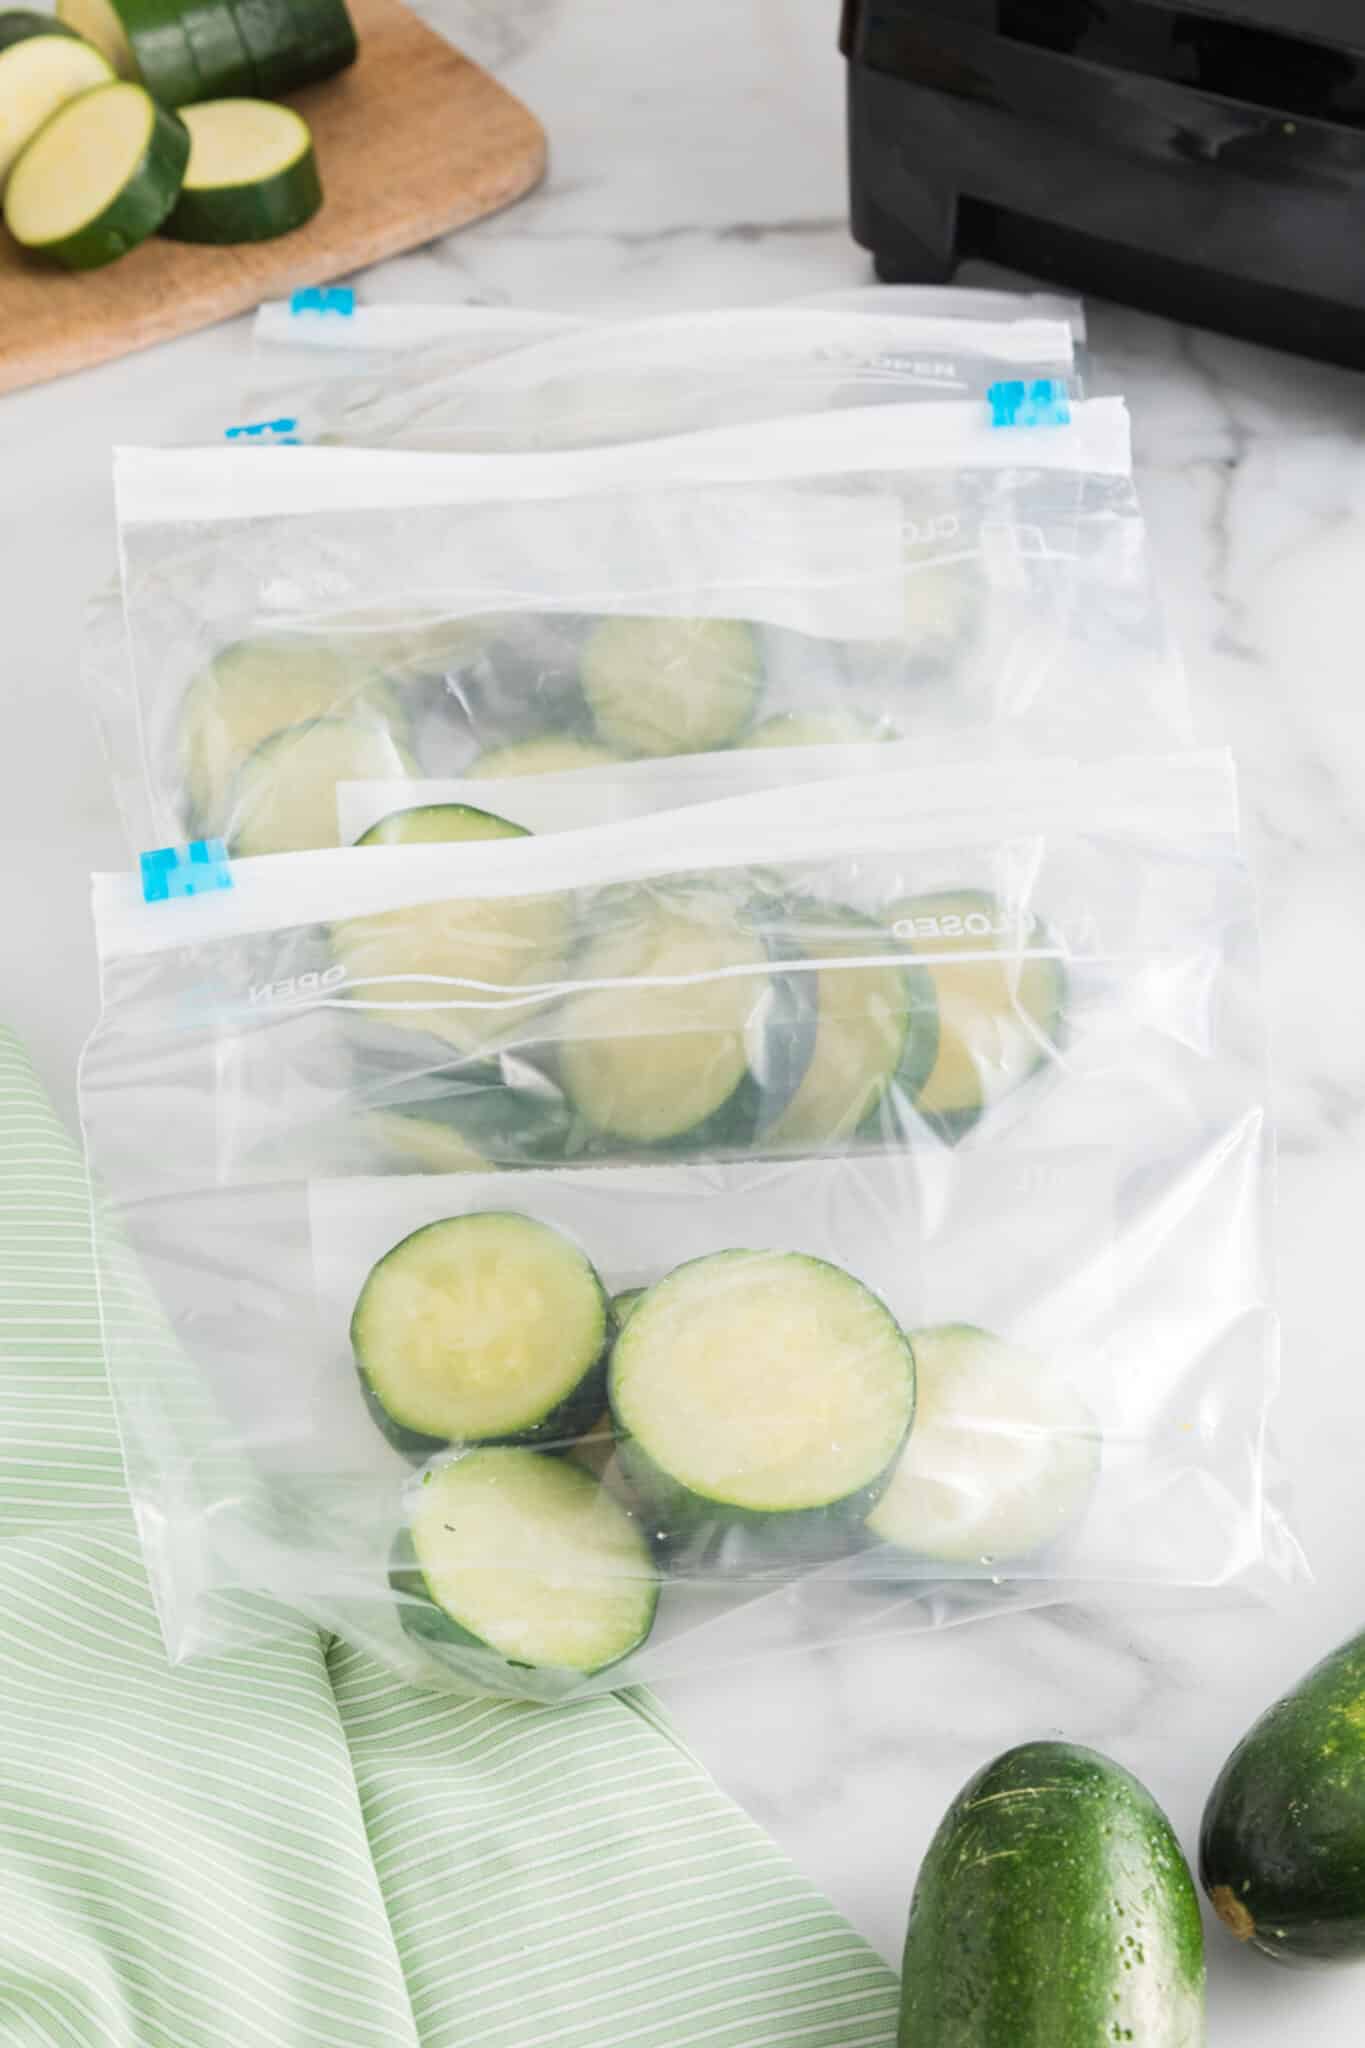 Frozen zucchini rounds in small ziploc baggies on a counter.